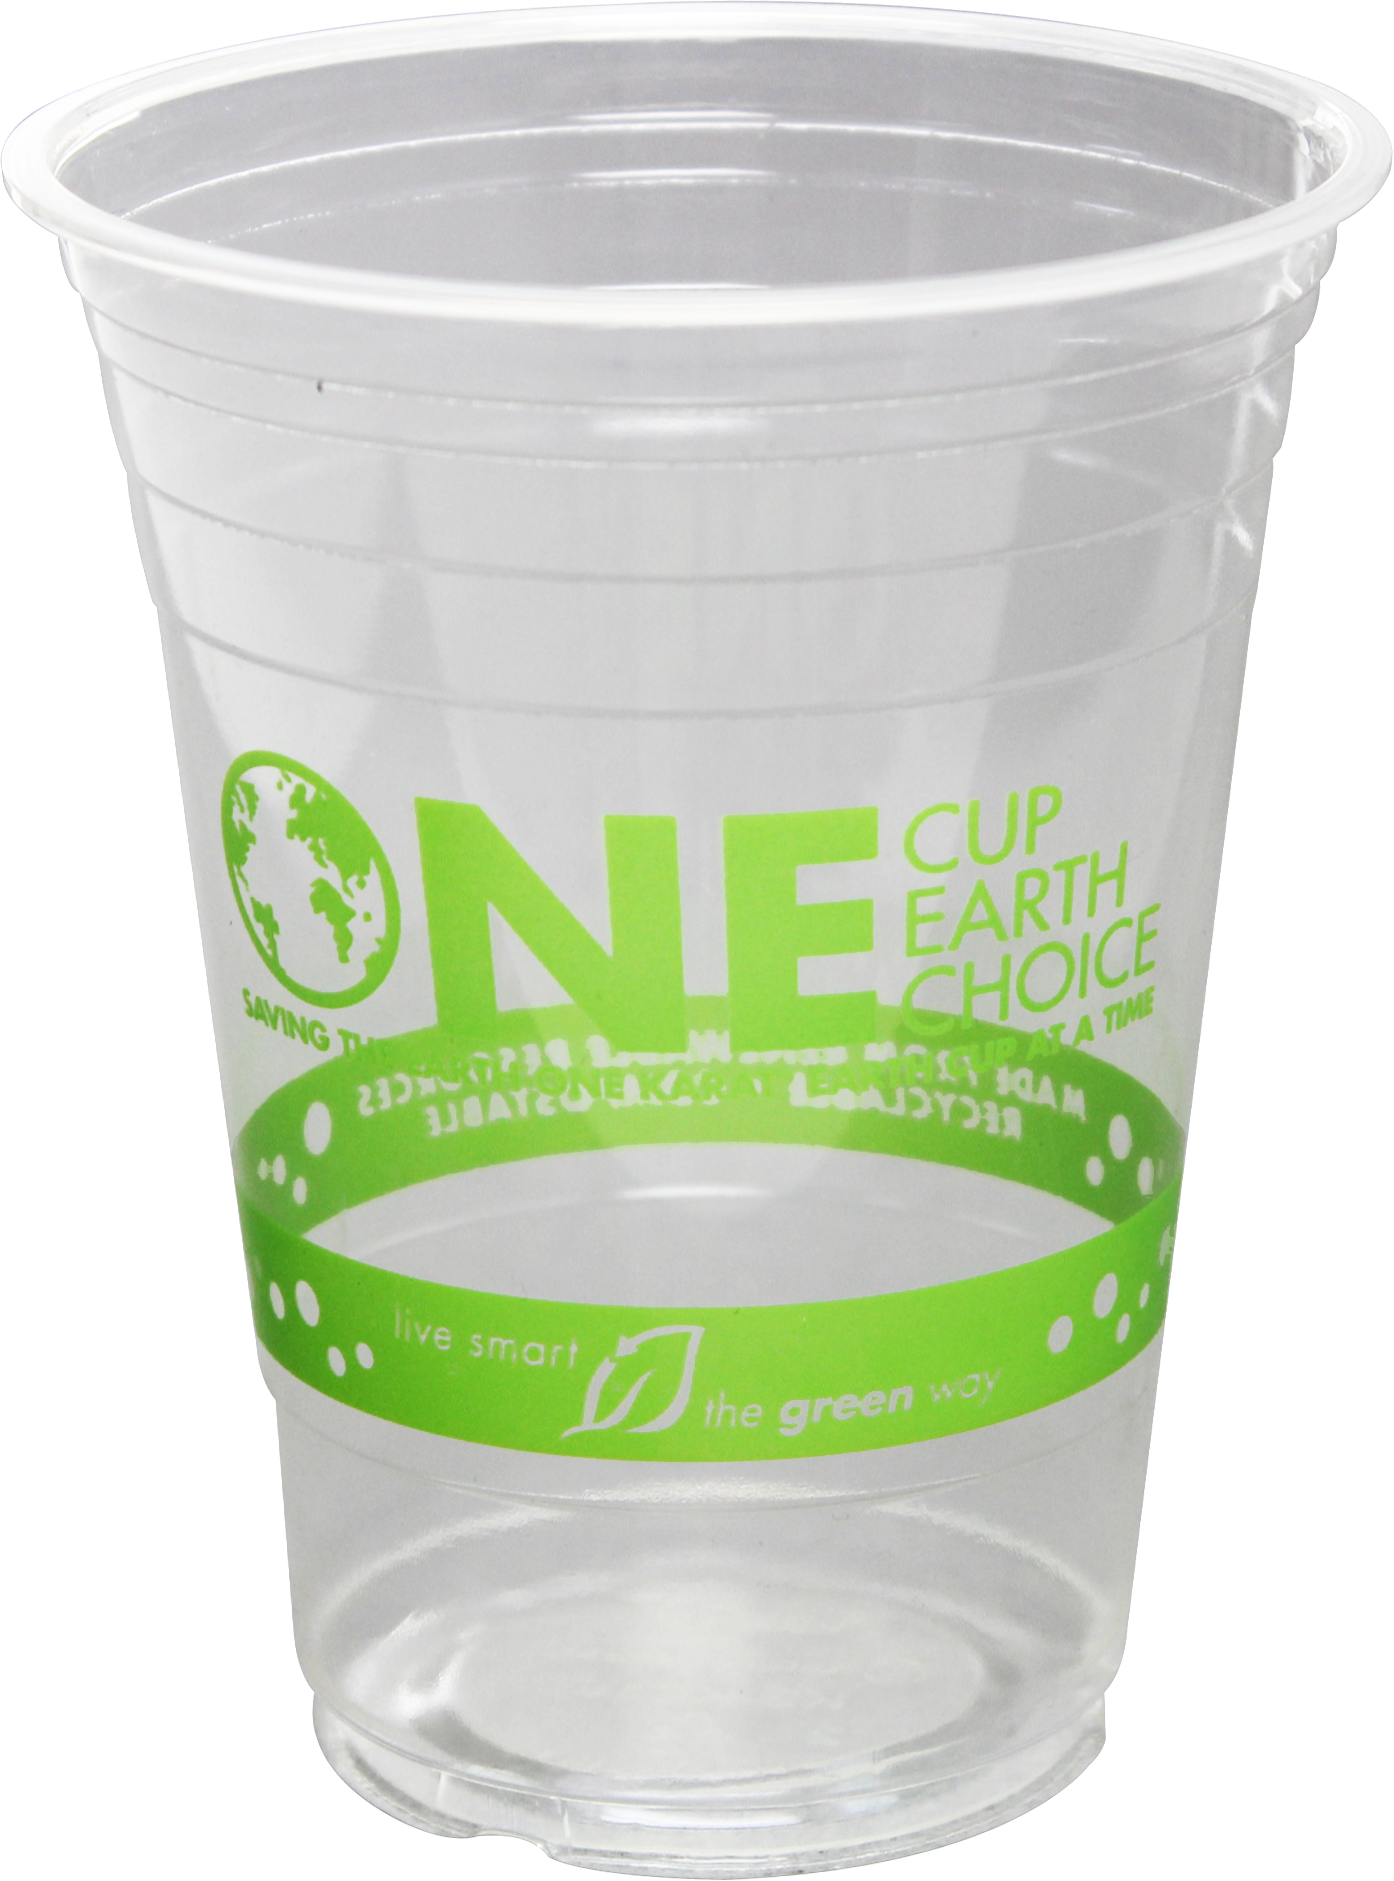 Eco-Friendly Cups, Flasks and Bottles You Can Buy on O'ahu